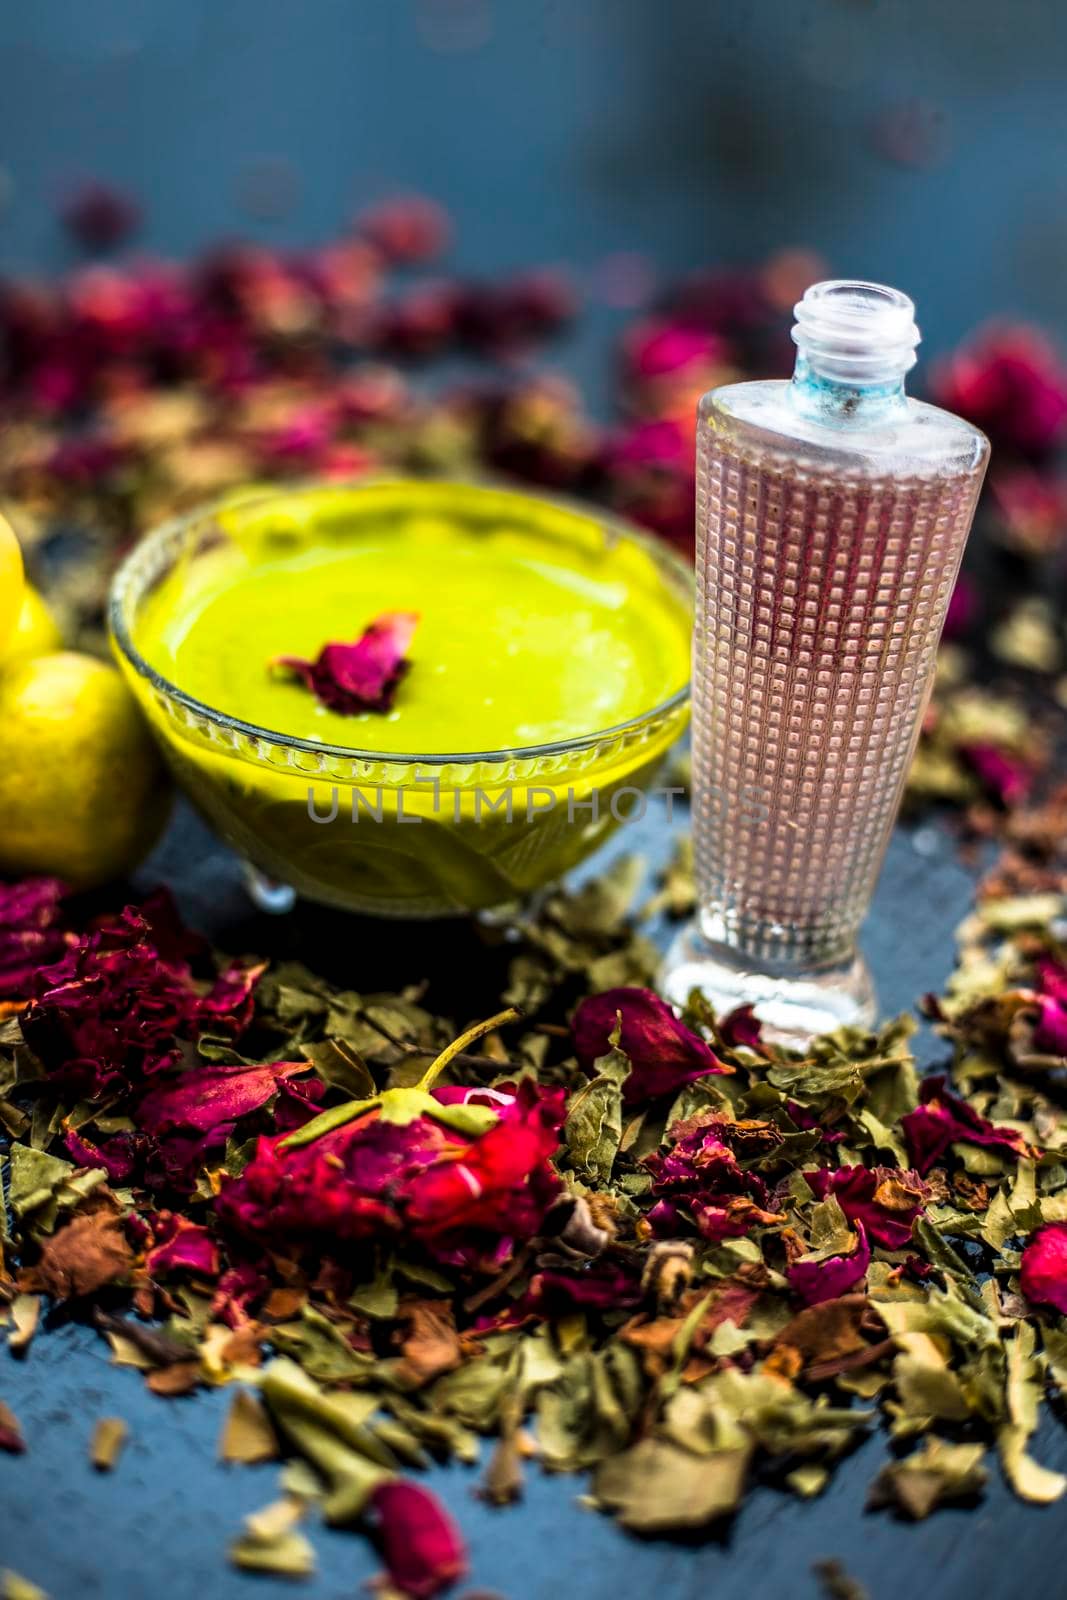 Neem or Indian Lilac face mask on the black wooden surface for oily skin consisting of neem leaves paste and lemon juice well mixed with rose water. by mirzamlk